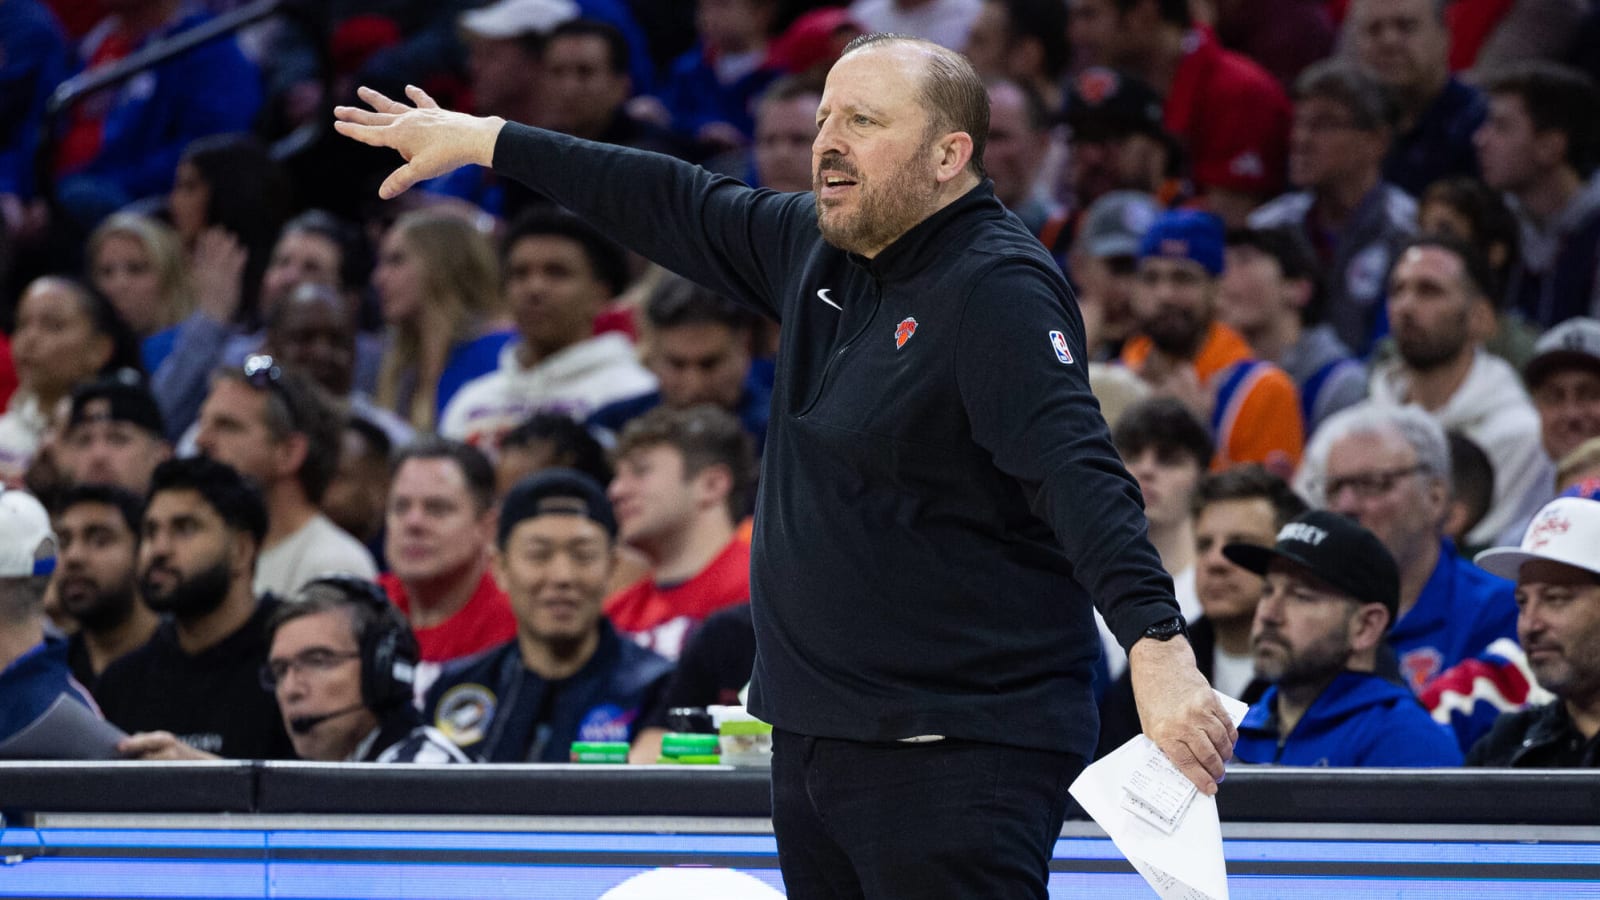 Tom Thibodeau Blasts Referees For Protecting Joel Embiid While Not Respecting Jalen Brunson